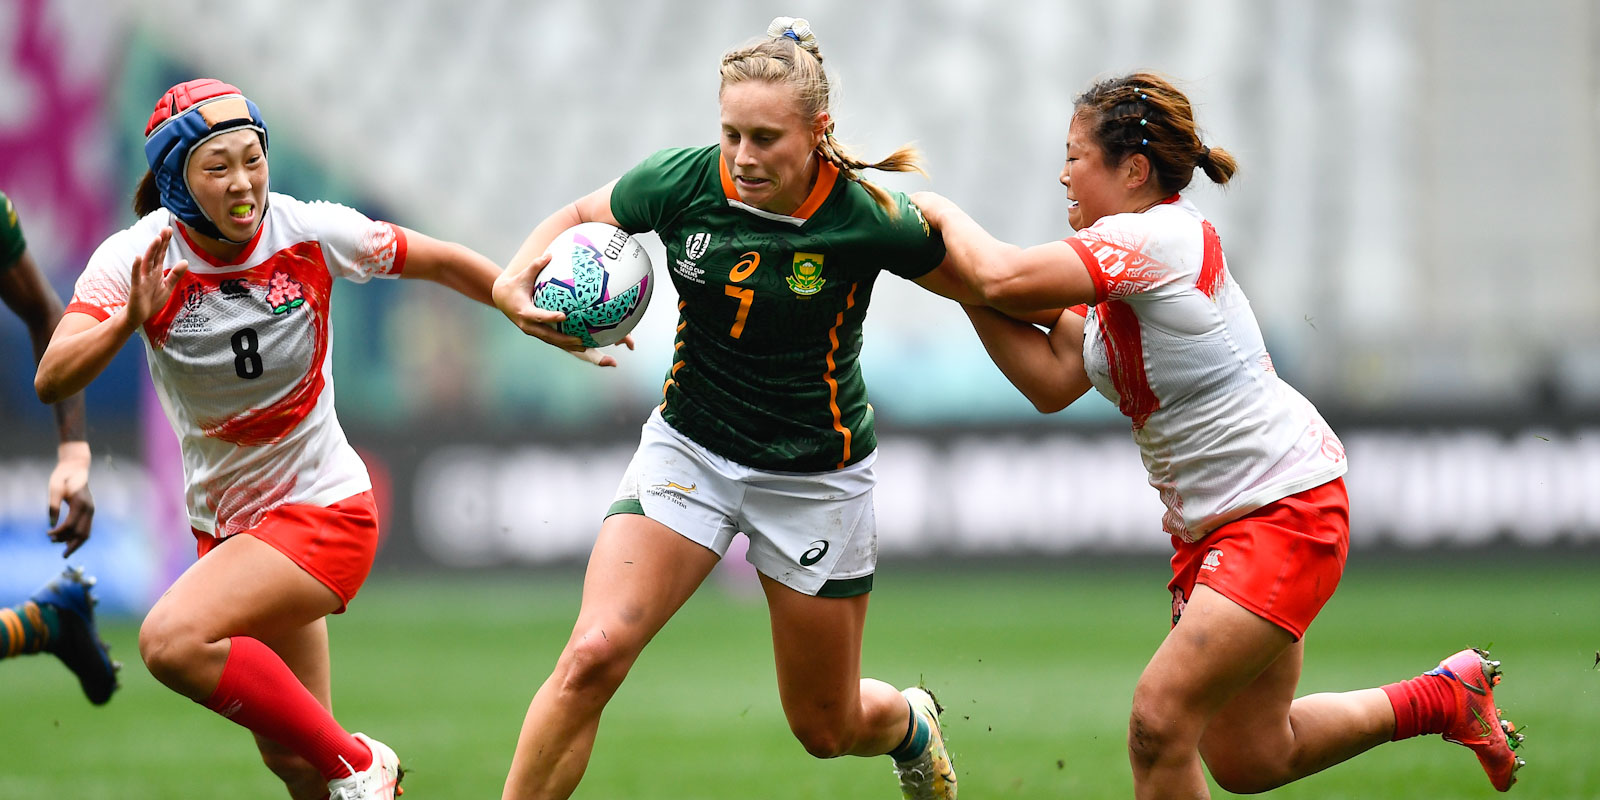 Eloise Webb is back in the squad after missing out in Cape Town due to injury.